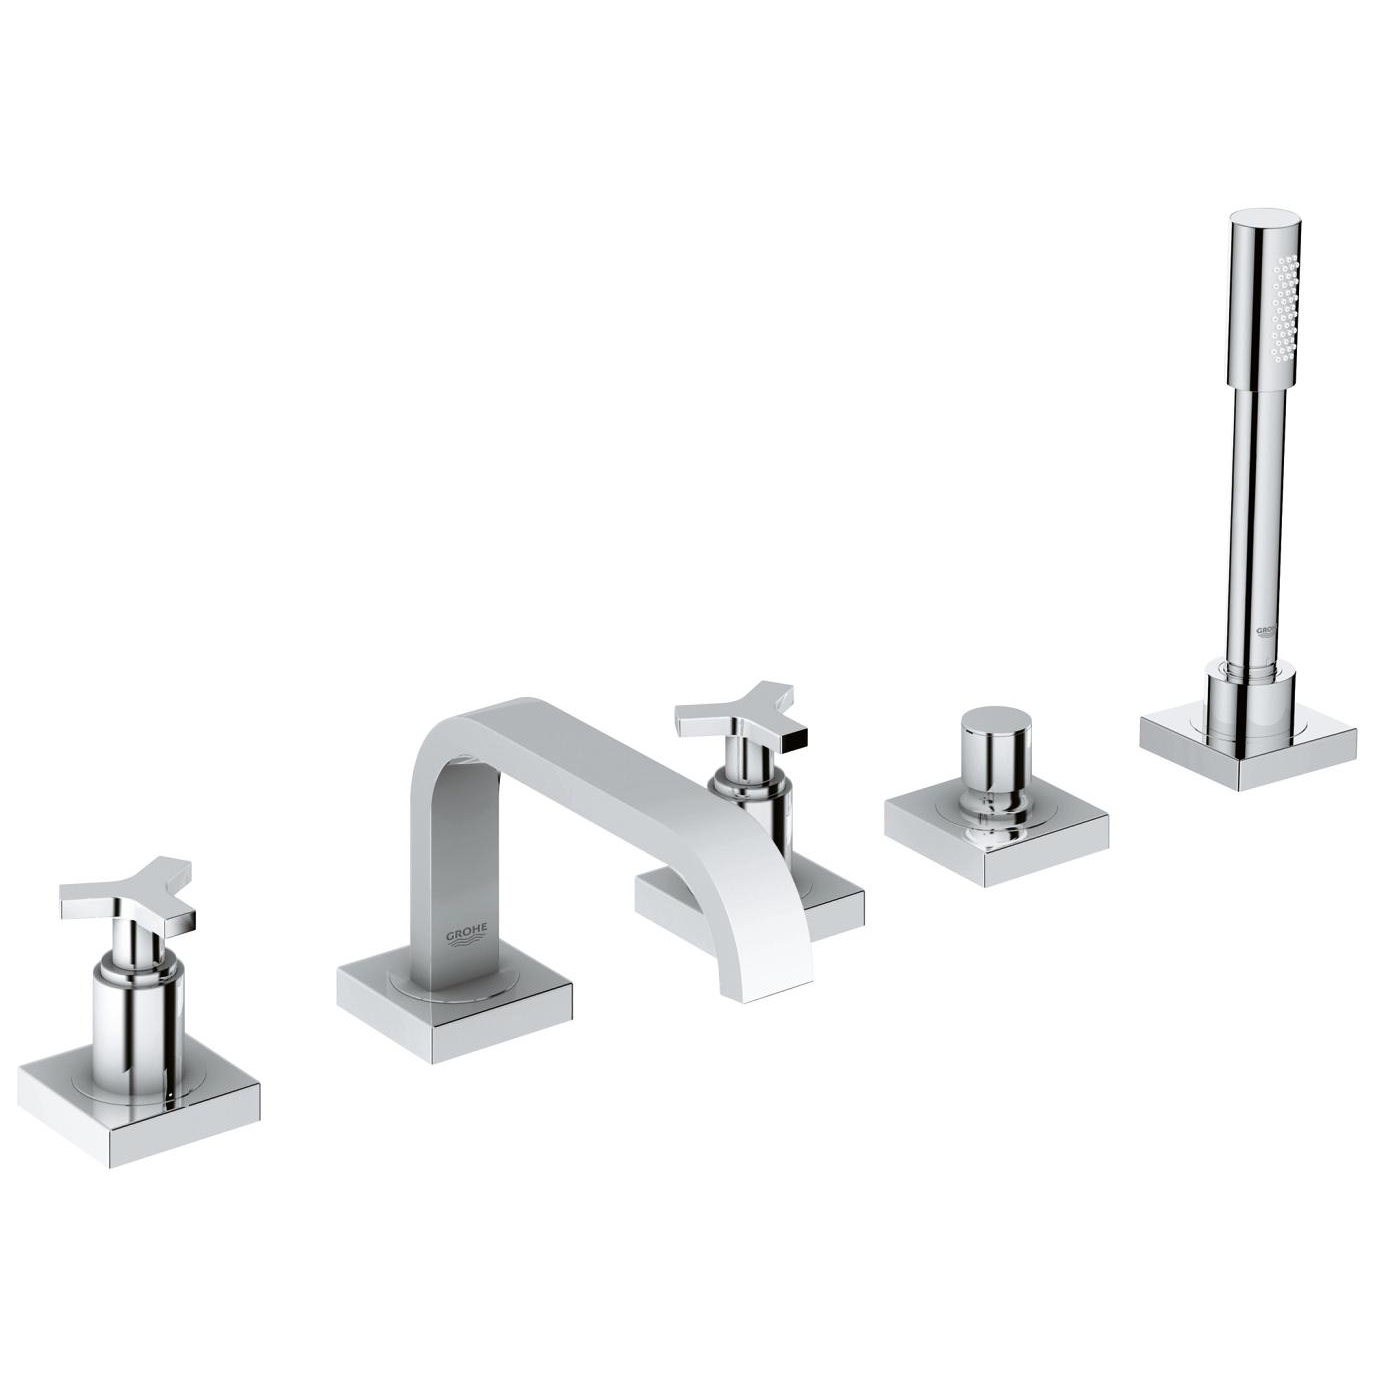 Allure Deck Mounted Tub Faucet Plus Hand Shower In StarLight Chrome